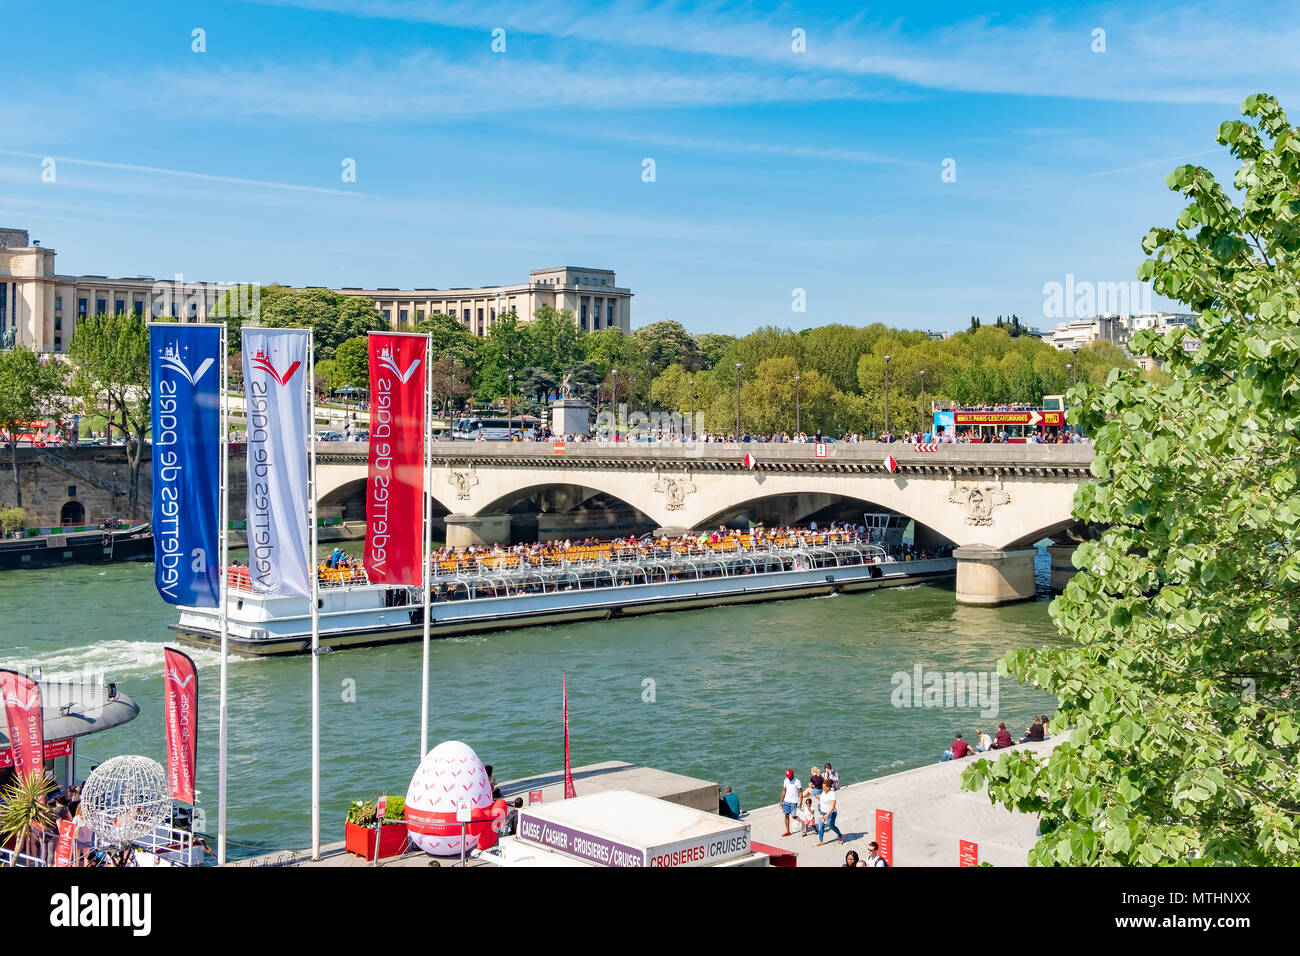 One of the many tour boats working the Seine River in Paris goesunder a busy bridge in Paris. Stock Photo